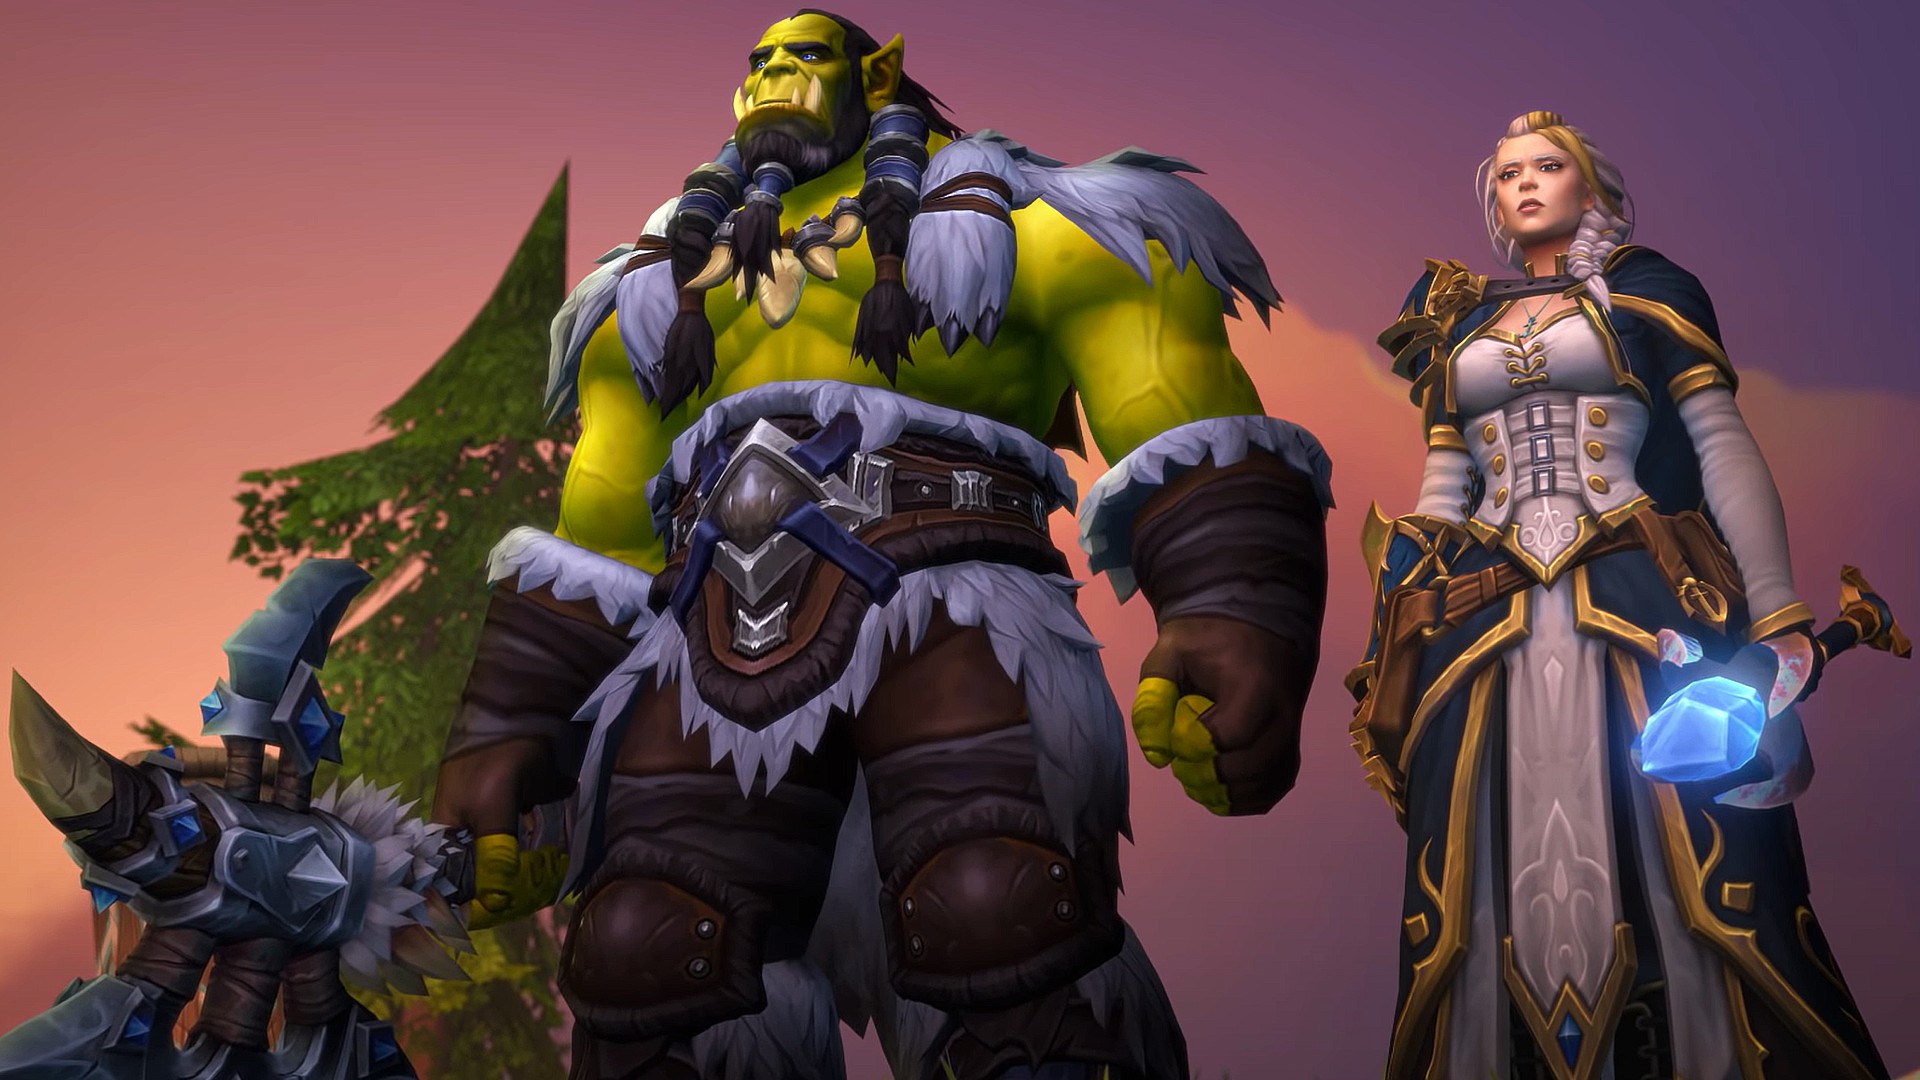 Microsoft Activision Blizzard deal “prevented” by CMA: Characters from the Blizzard MMORPG World of Warcraft